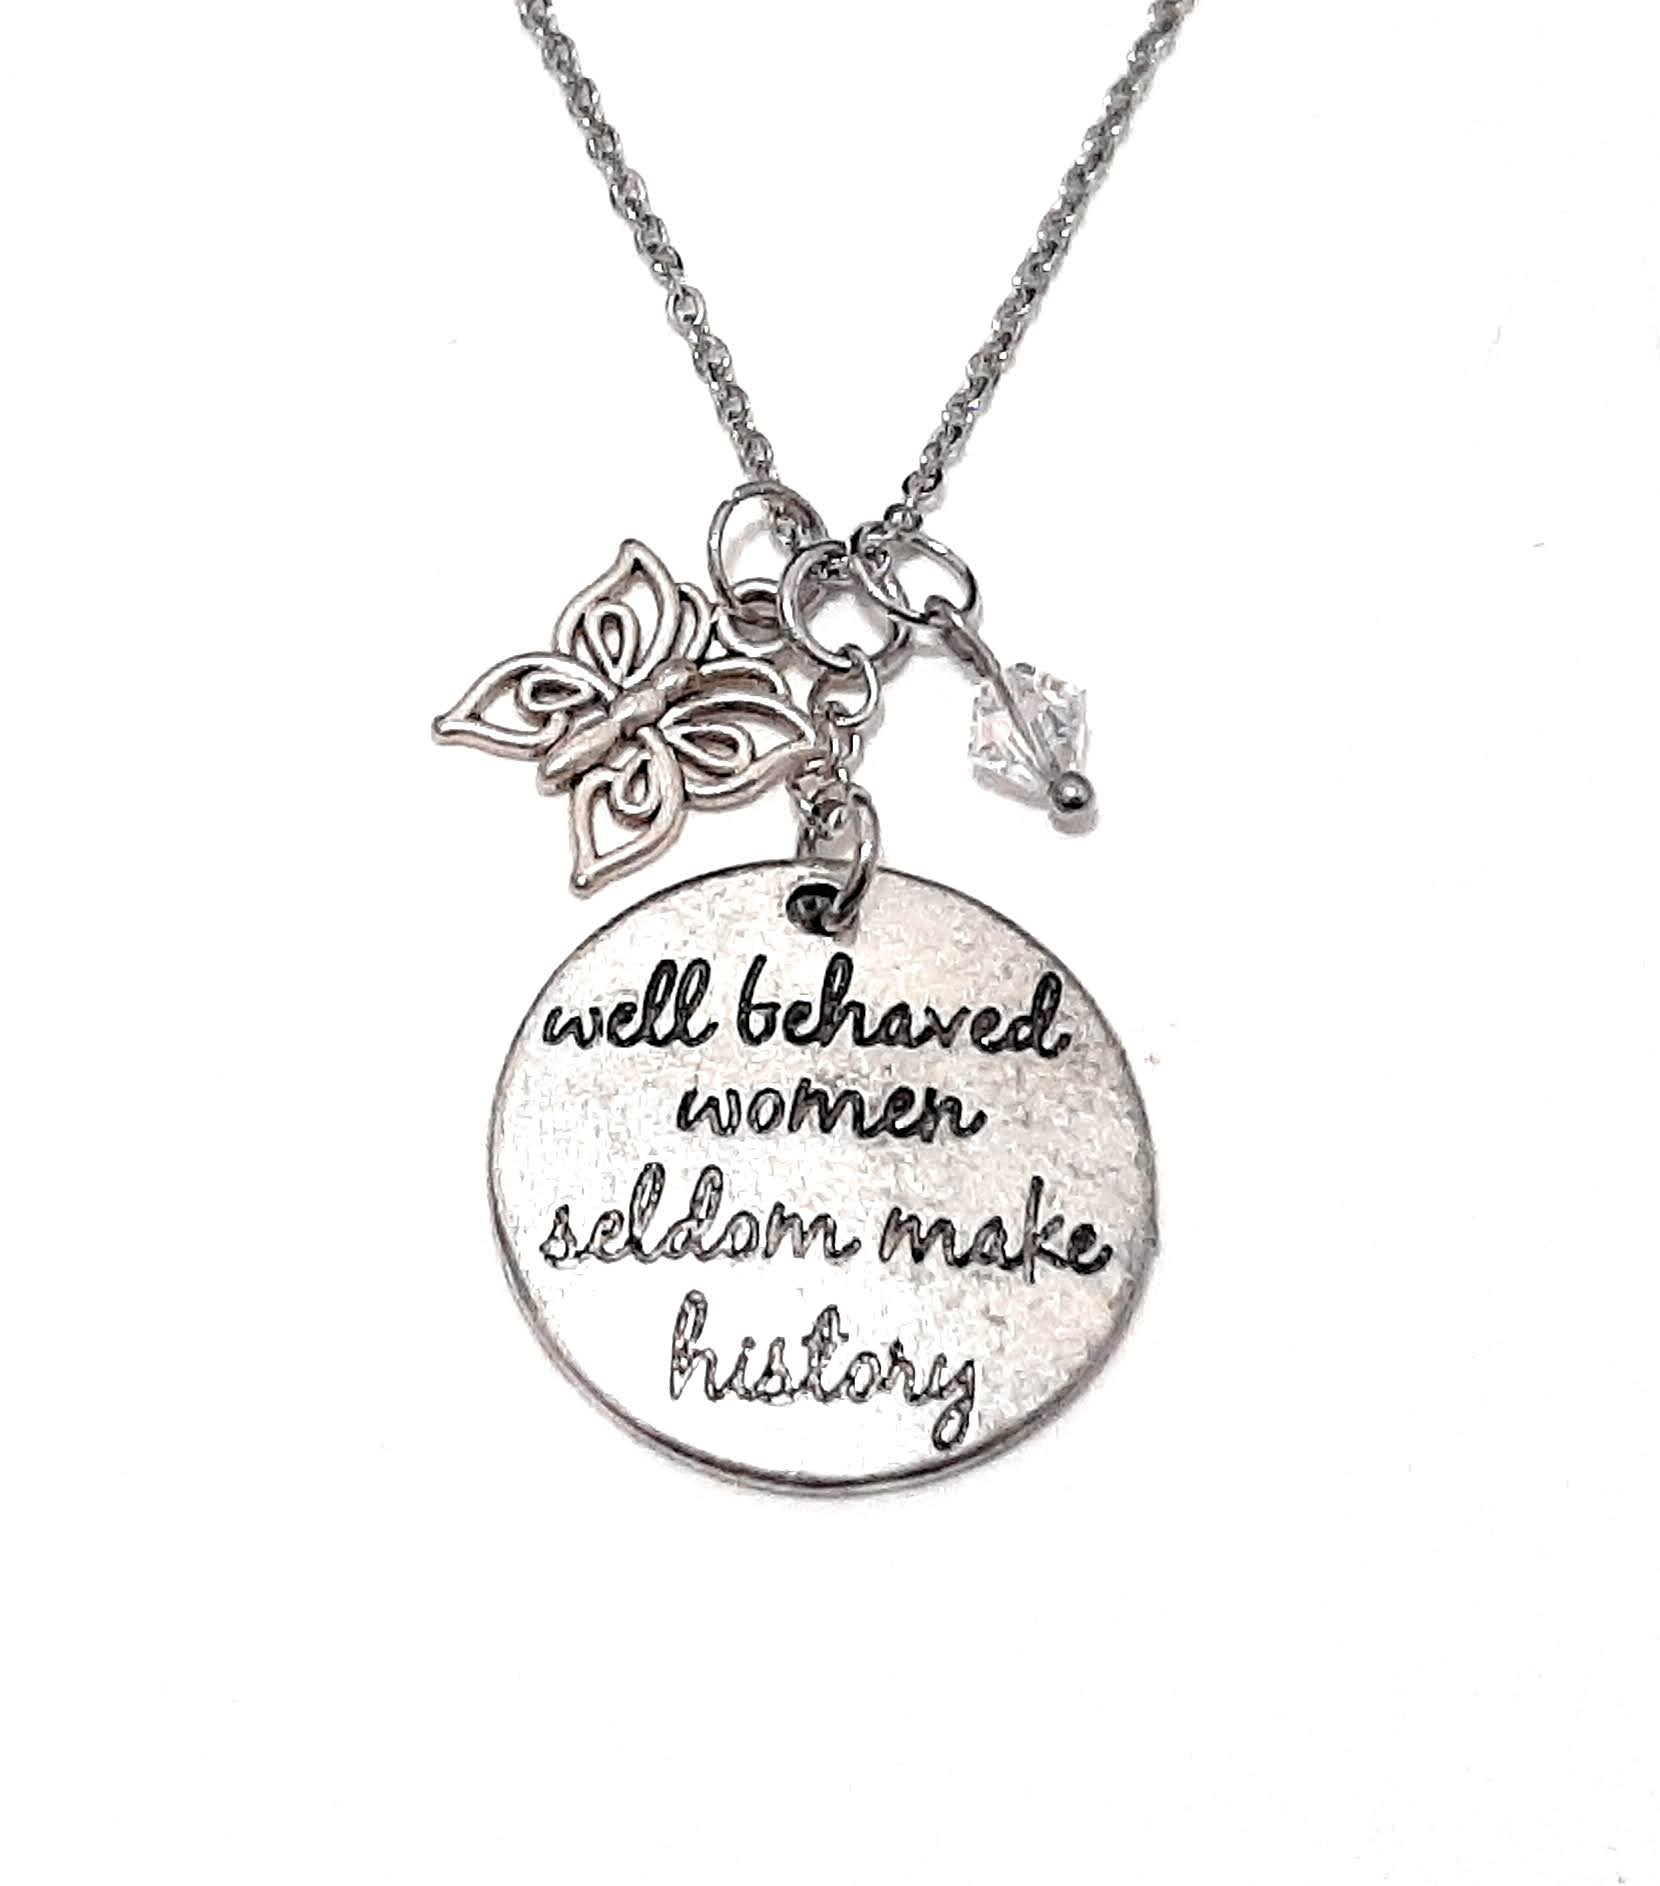 Message Pendant Necklace "Well behaved women seldom make history" Your Choice of Charm and Birthstone Color